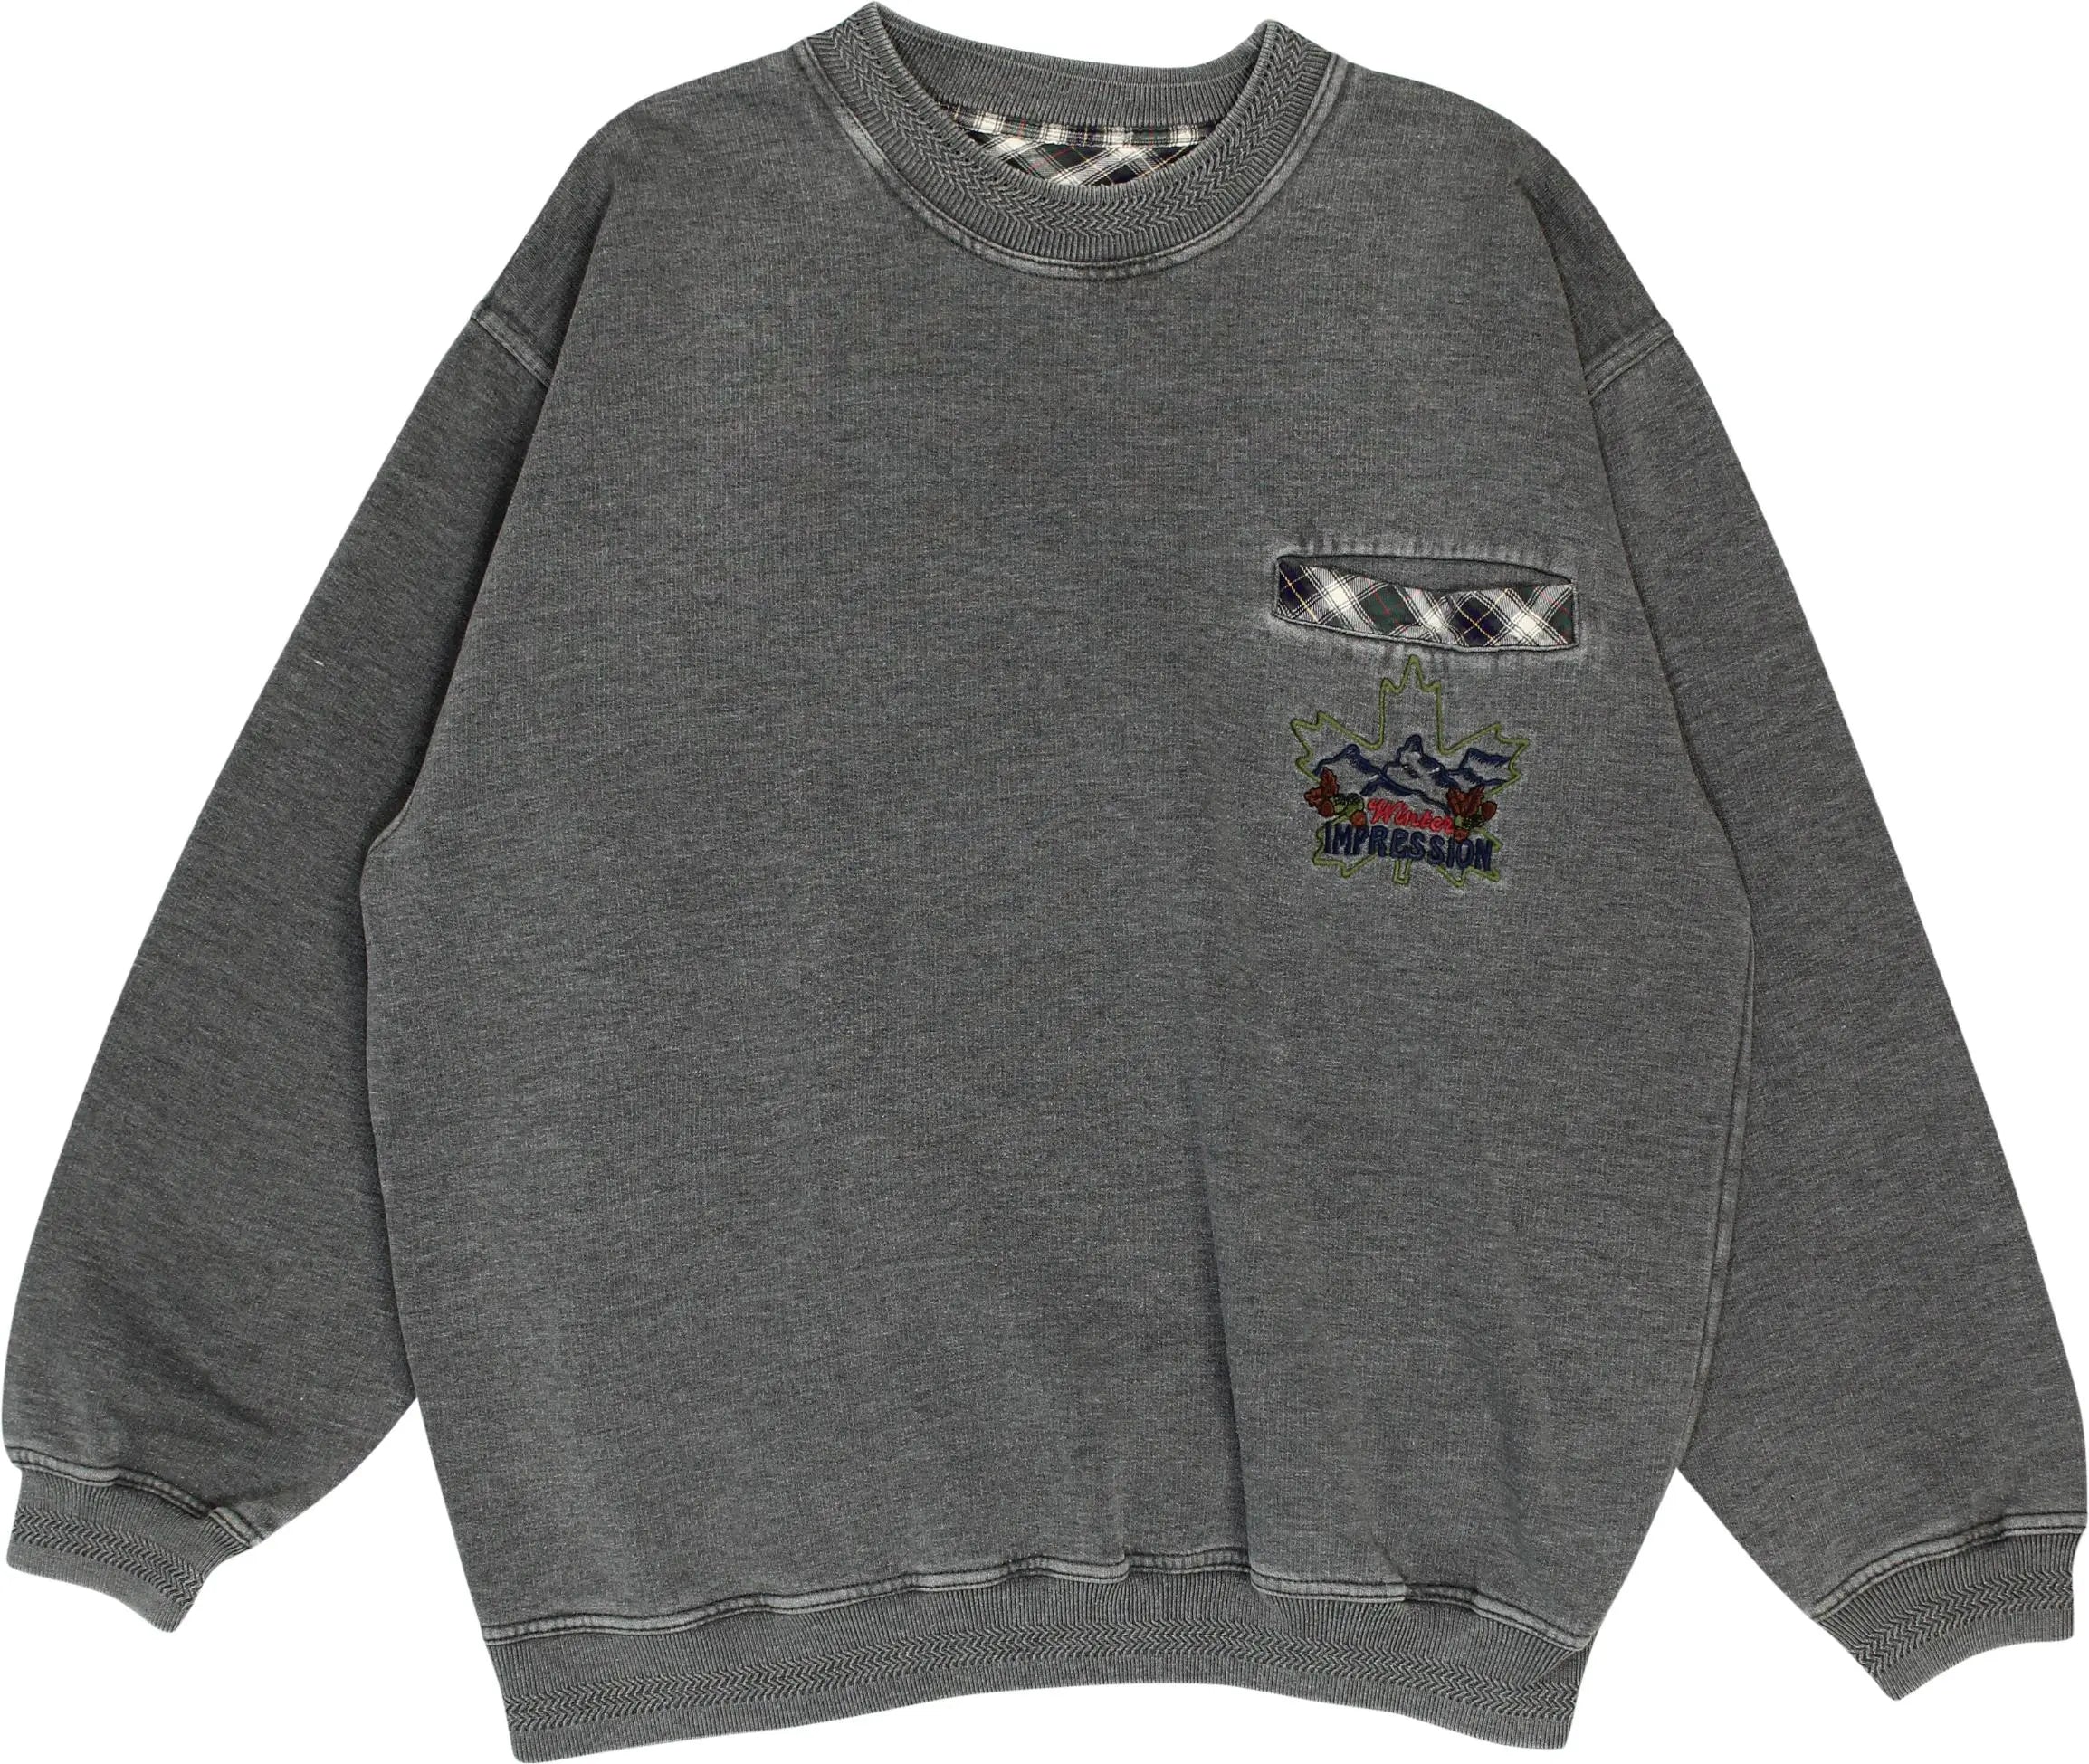 Unknown - Grey Sweater- ThriftTale.com - Vintage and second handclothing